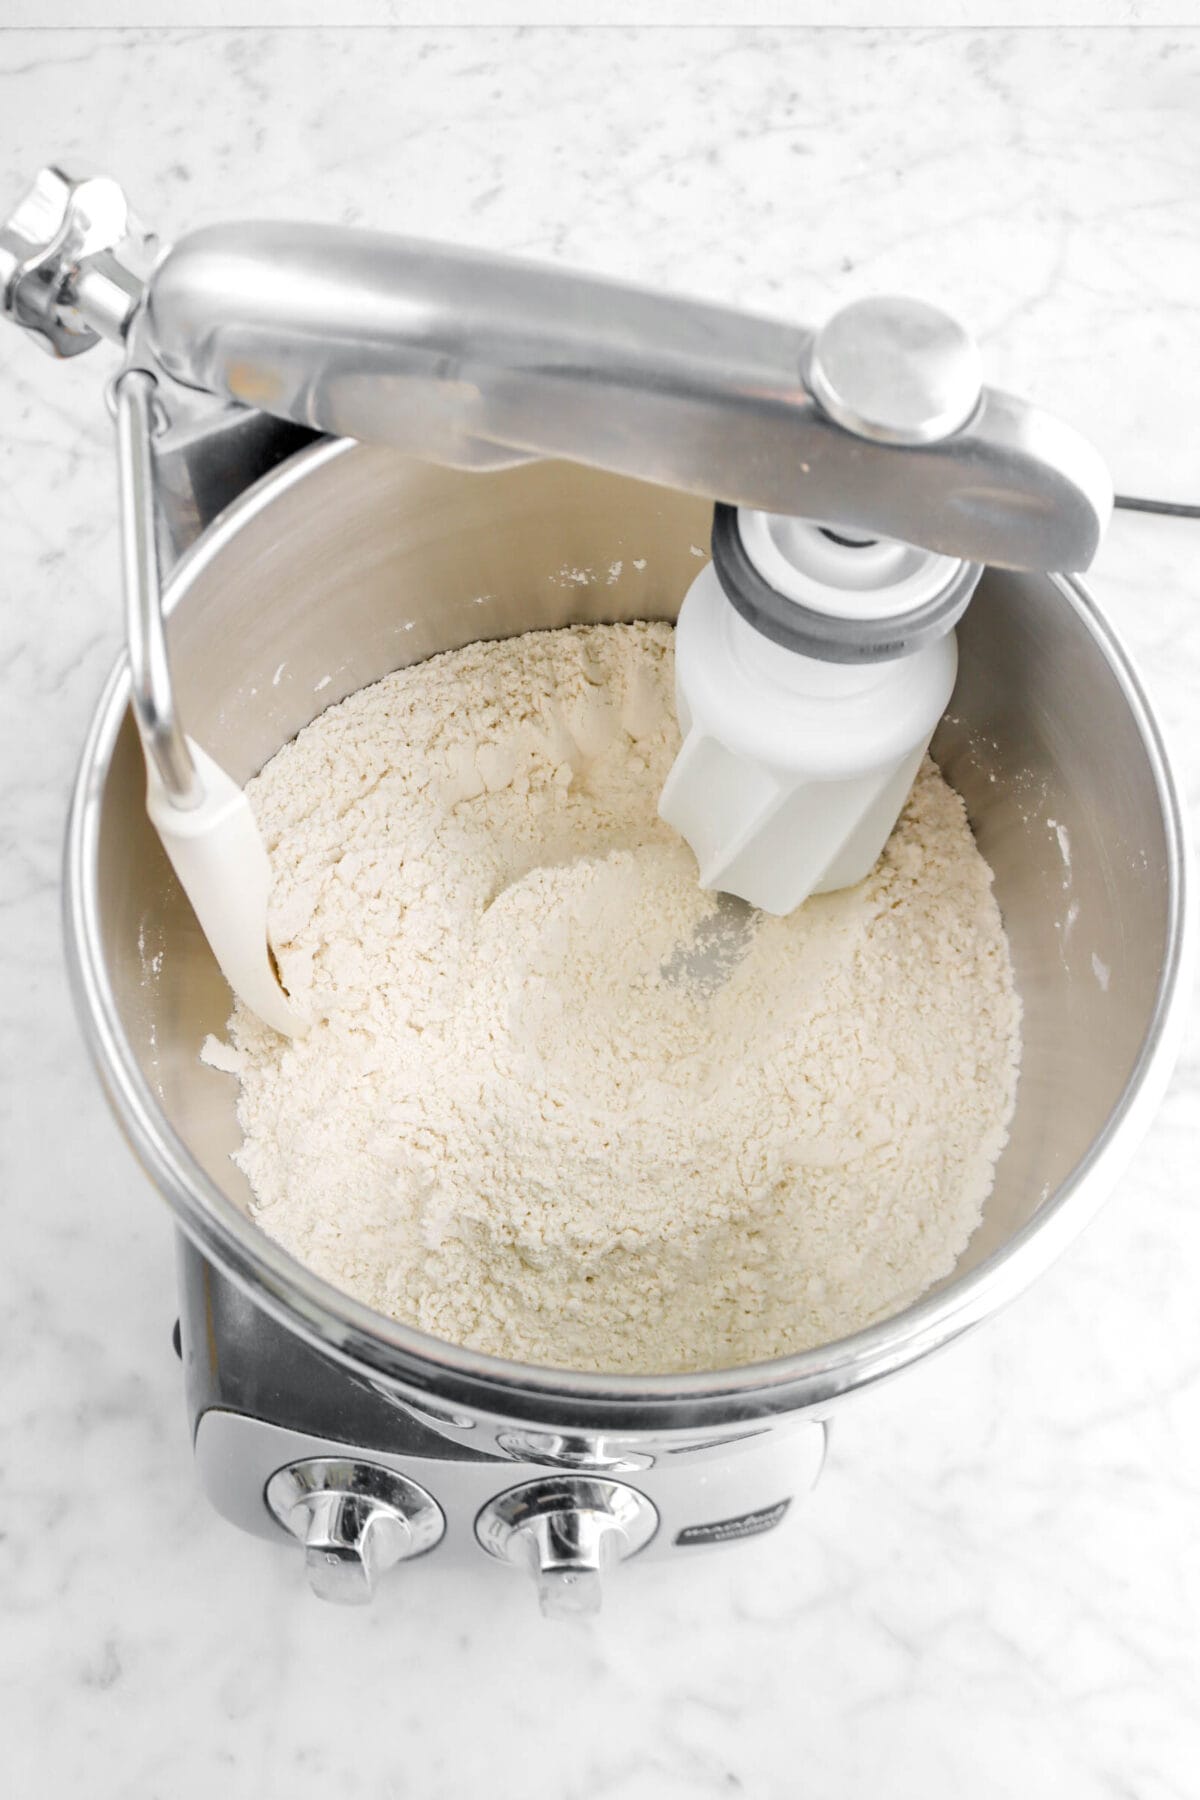 dry ingredients stirred together in mixer bowl